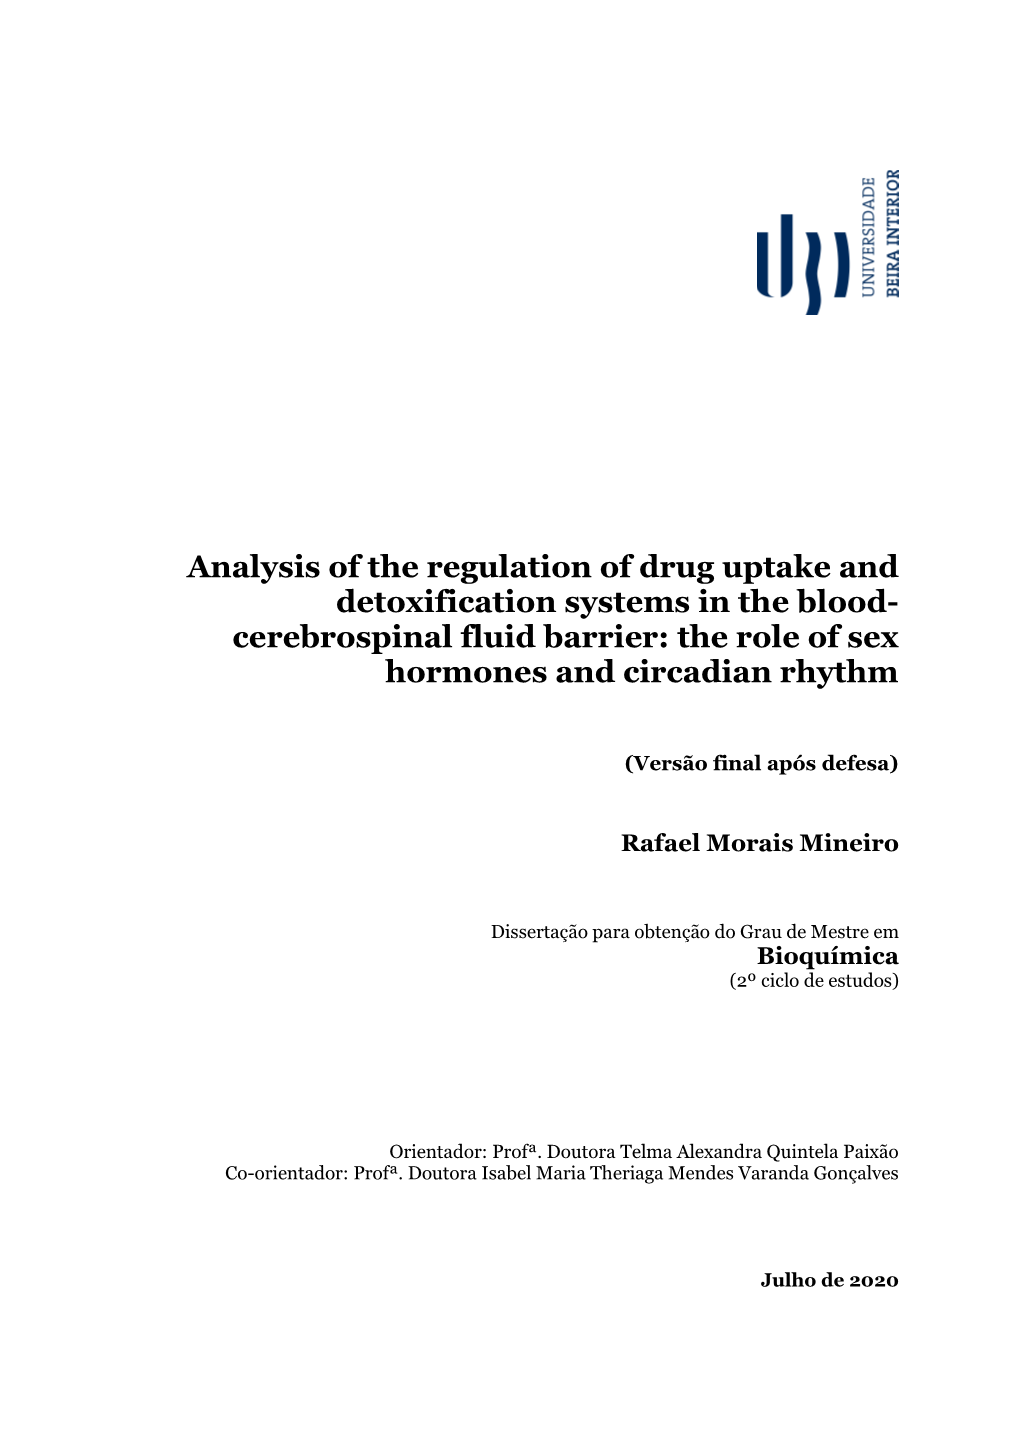 Analysis of the Regulation of Drug Uptake and Detoxification Systems in the Blood- Cerebrospinal Fluid Barrier: the Role of Sex Hormones and Circadian Rhythm